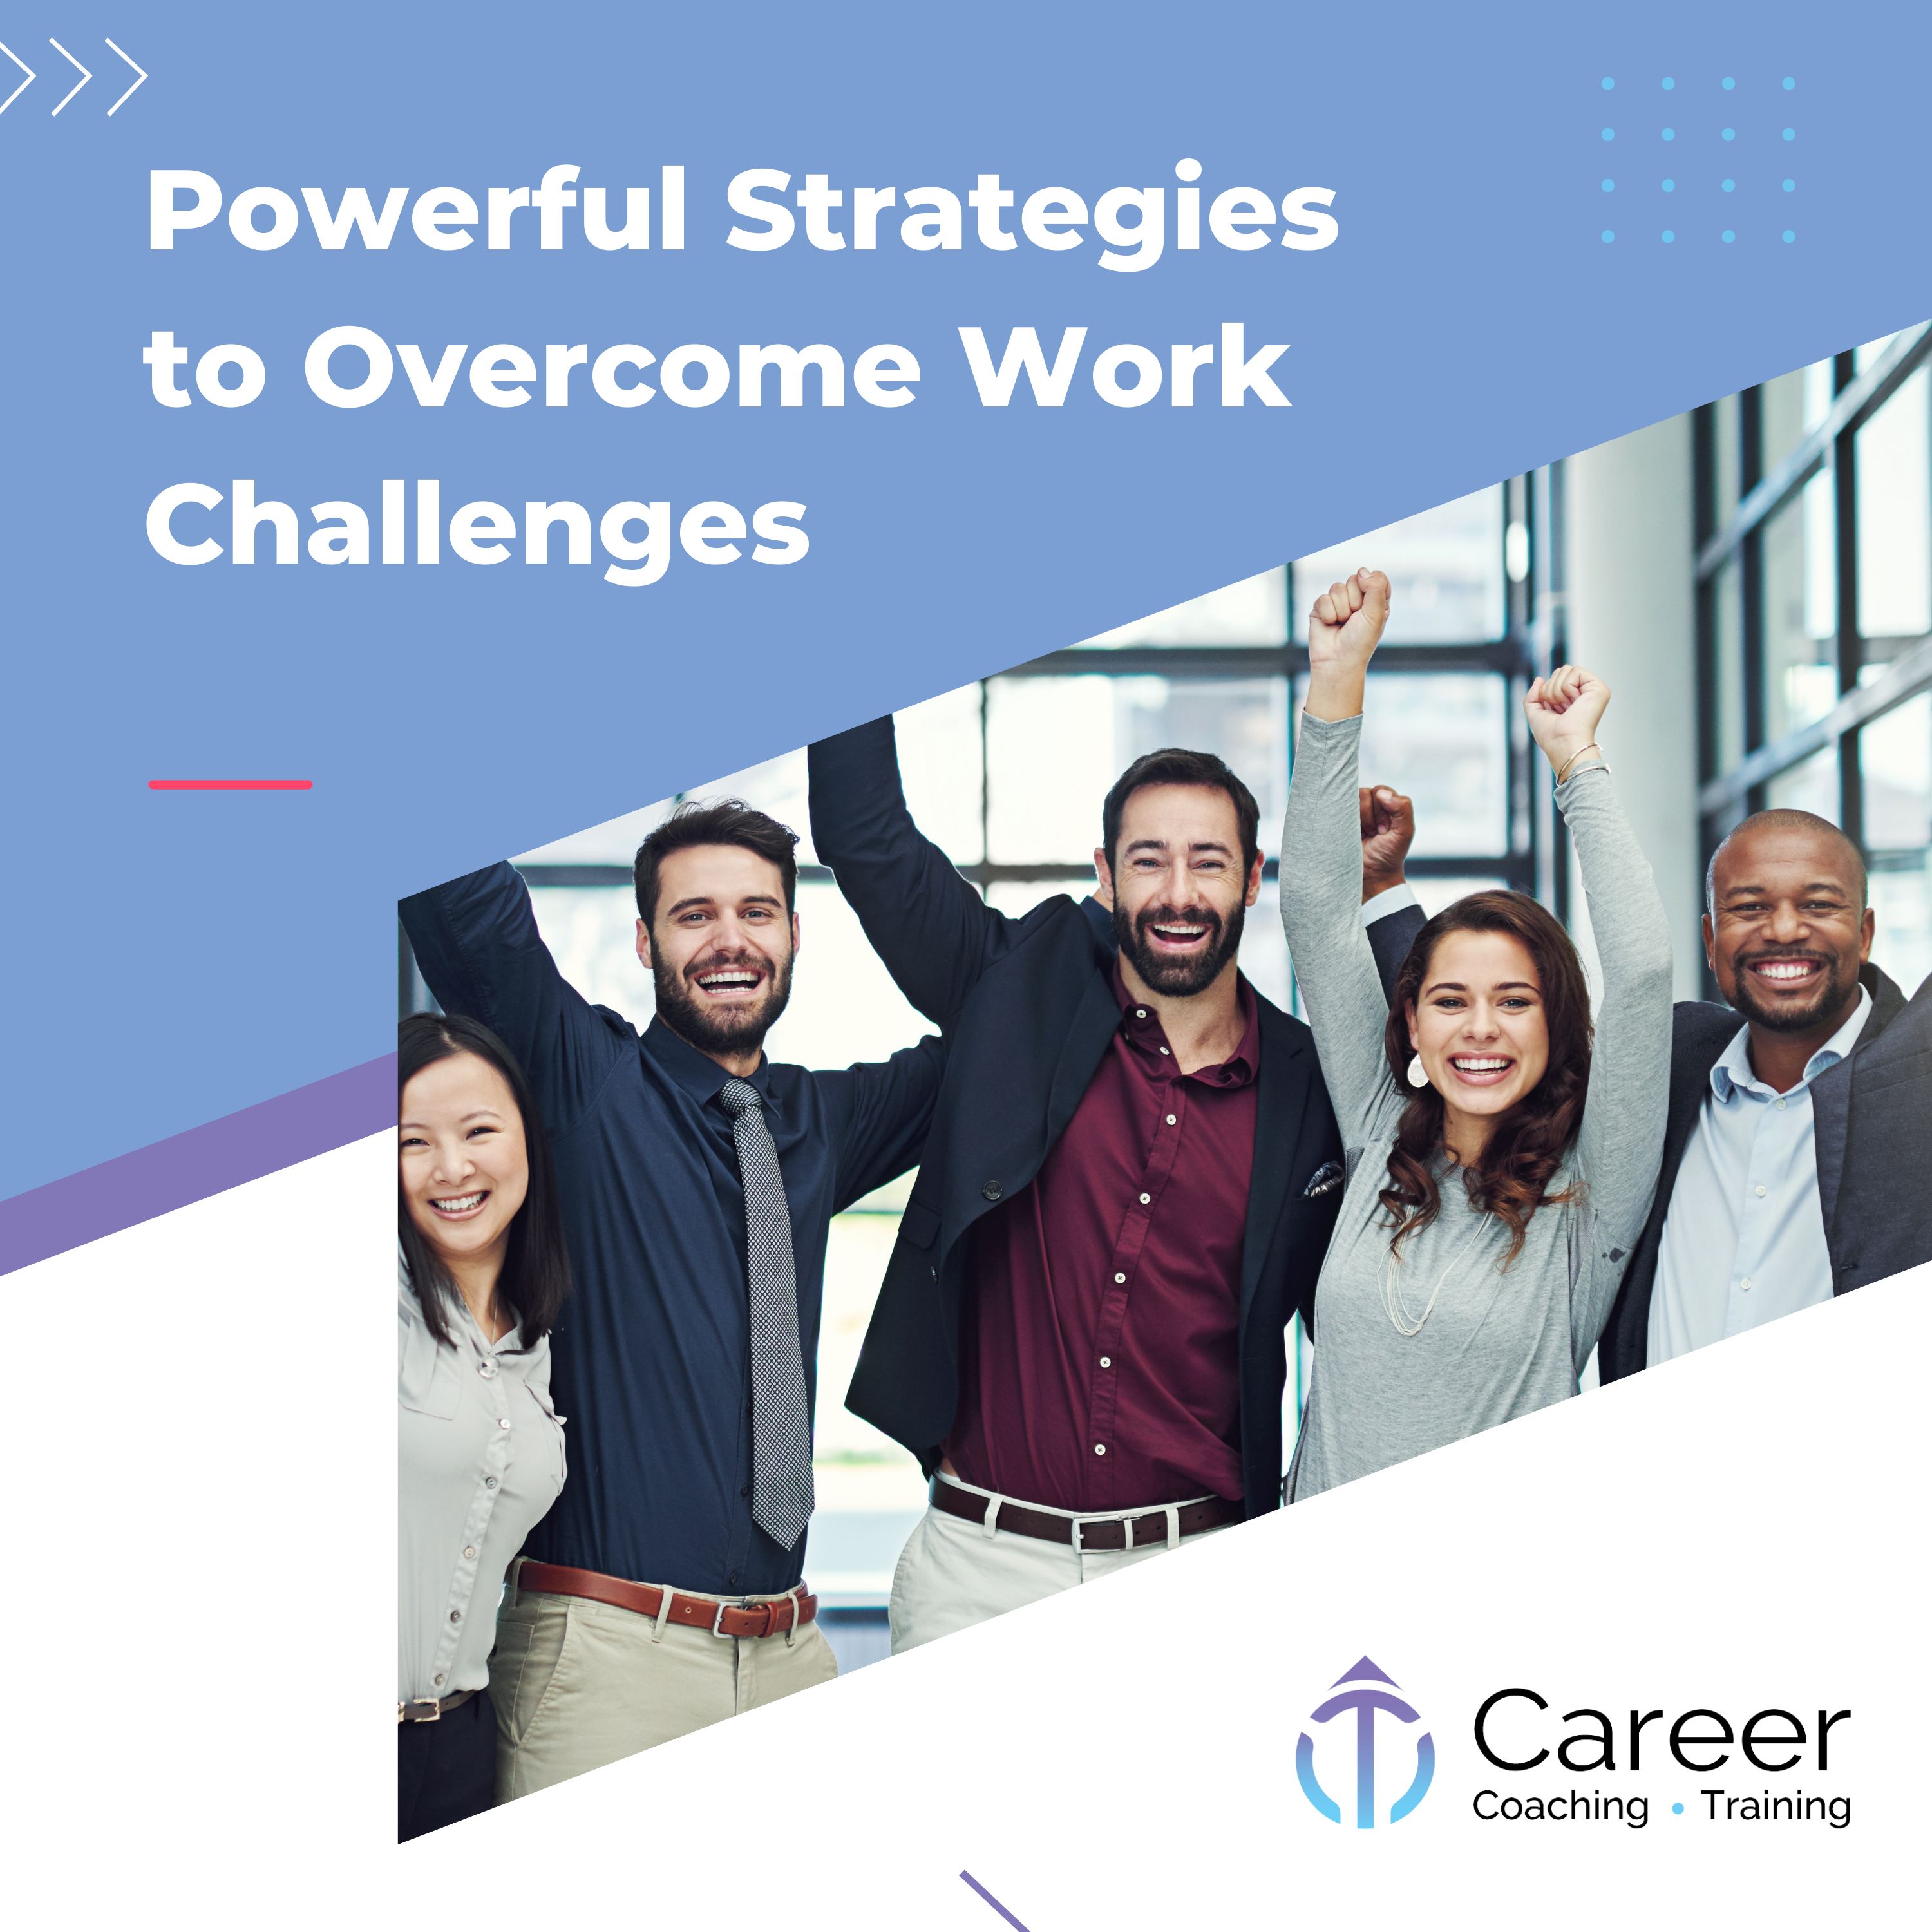 Powerful Strategies to Overcome Work Challenges